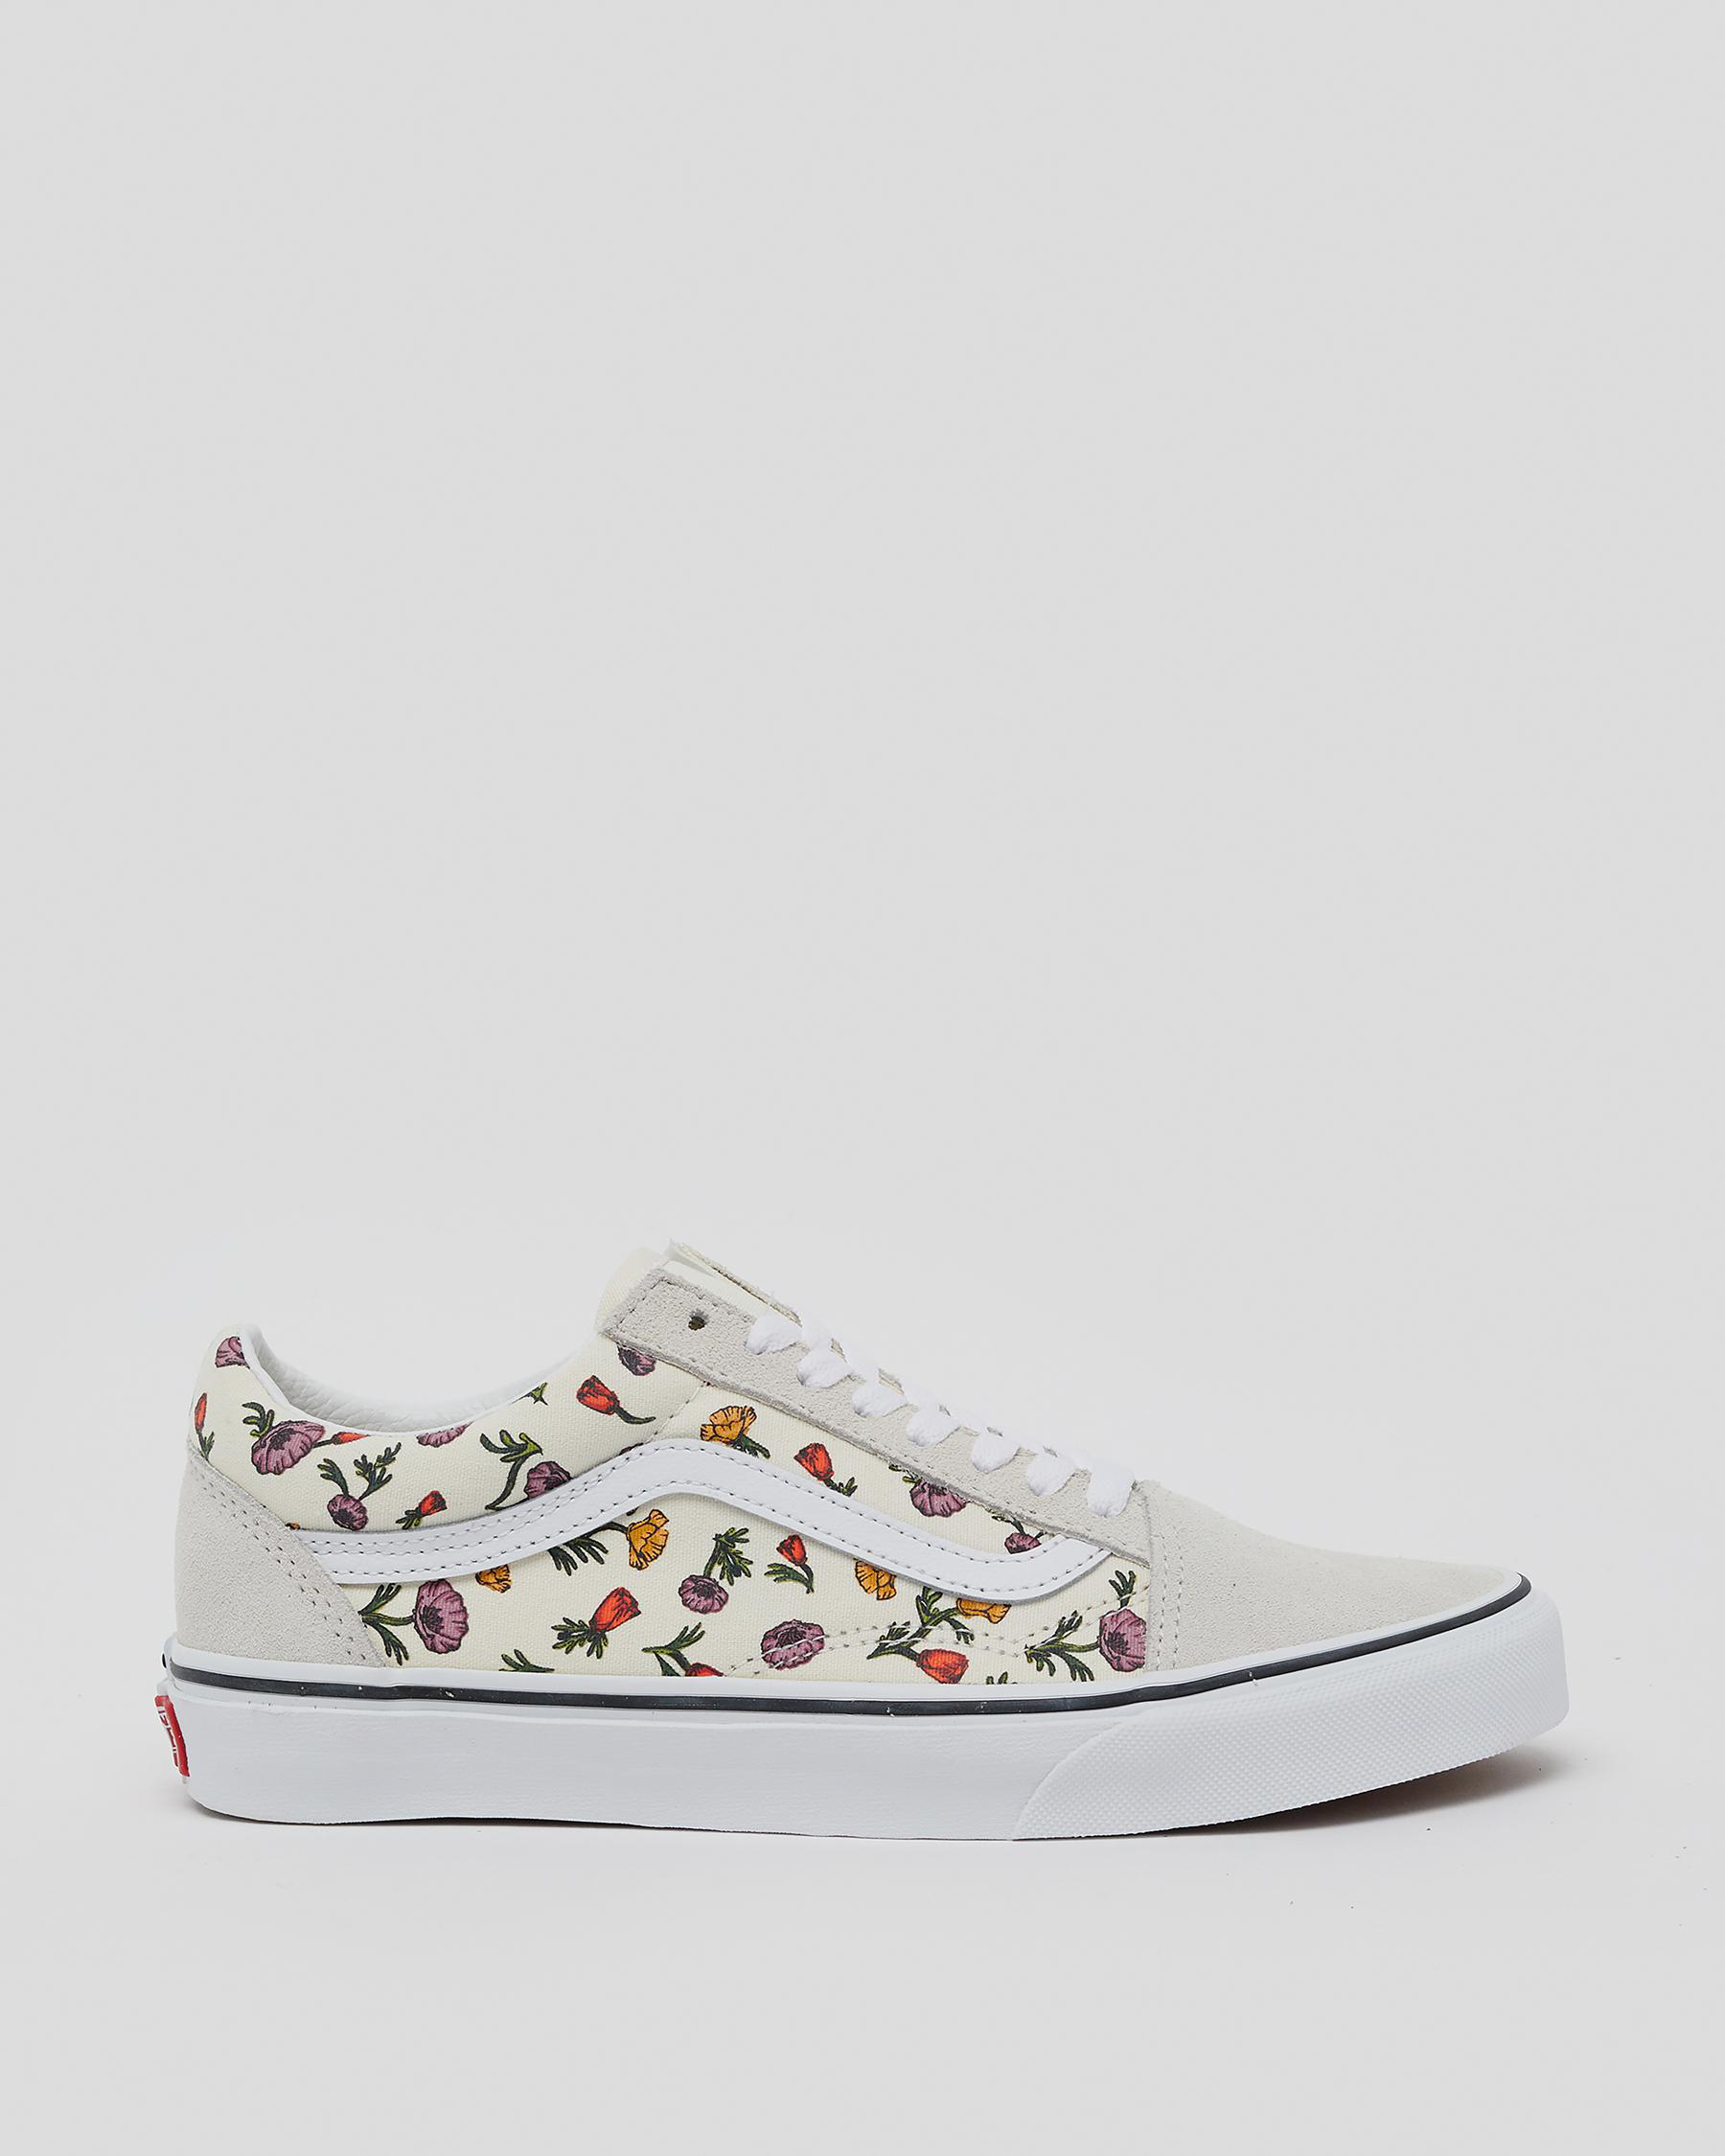 Shop Vans Womens Old Skool Shoes In Poppy Floral Cream - Fast Shipping ...